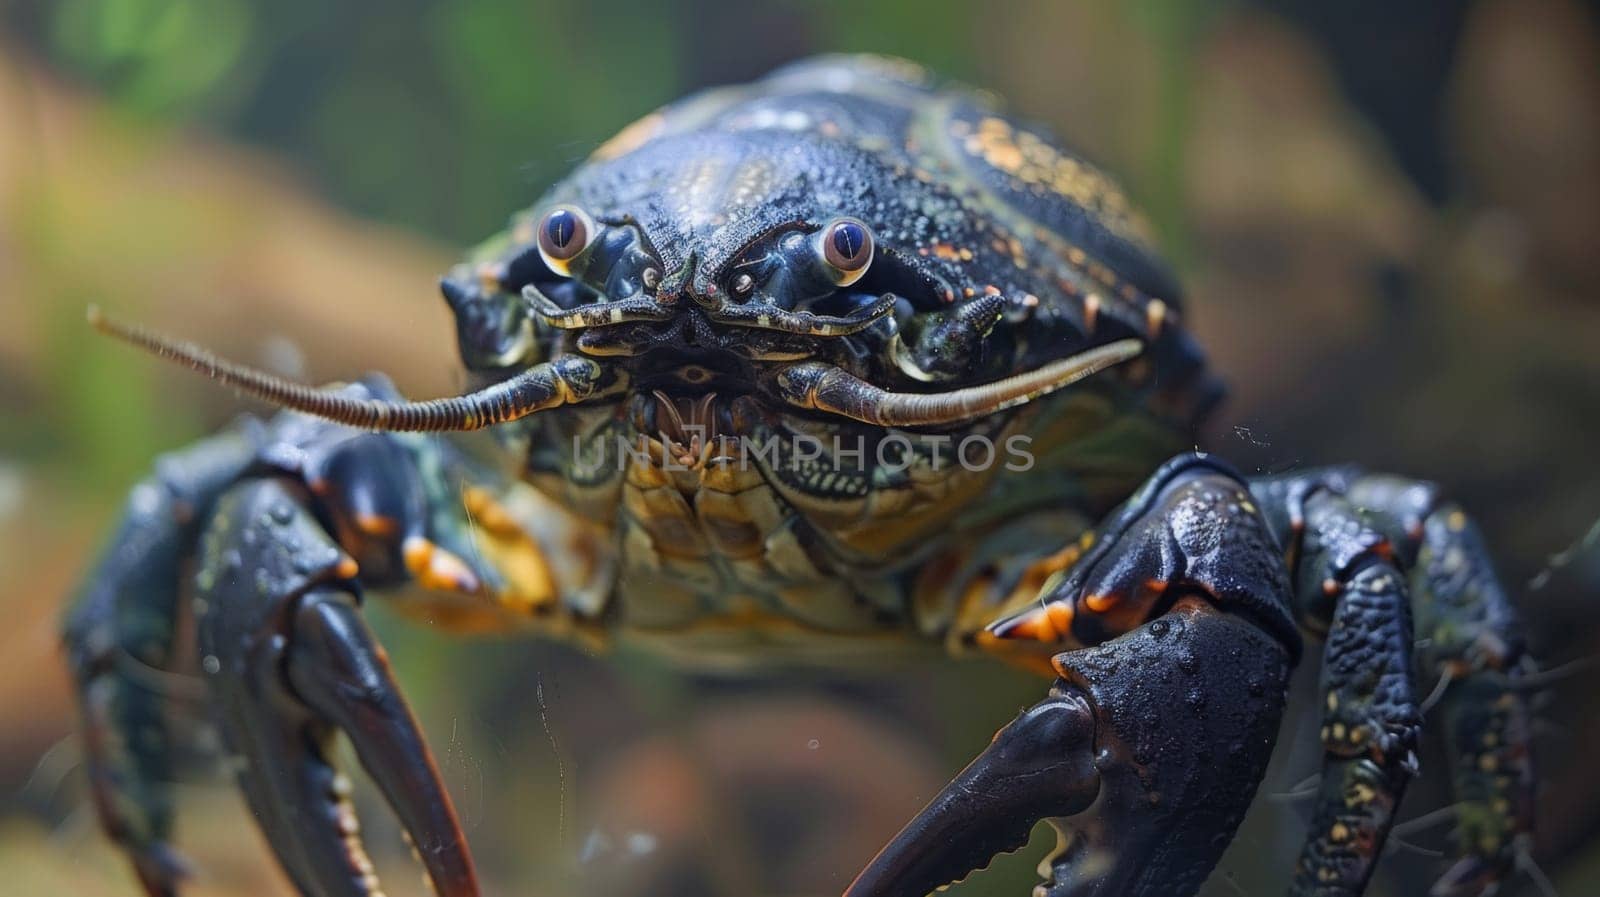 A close up of a crab with large eyes and long legs